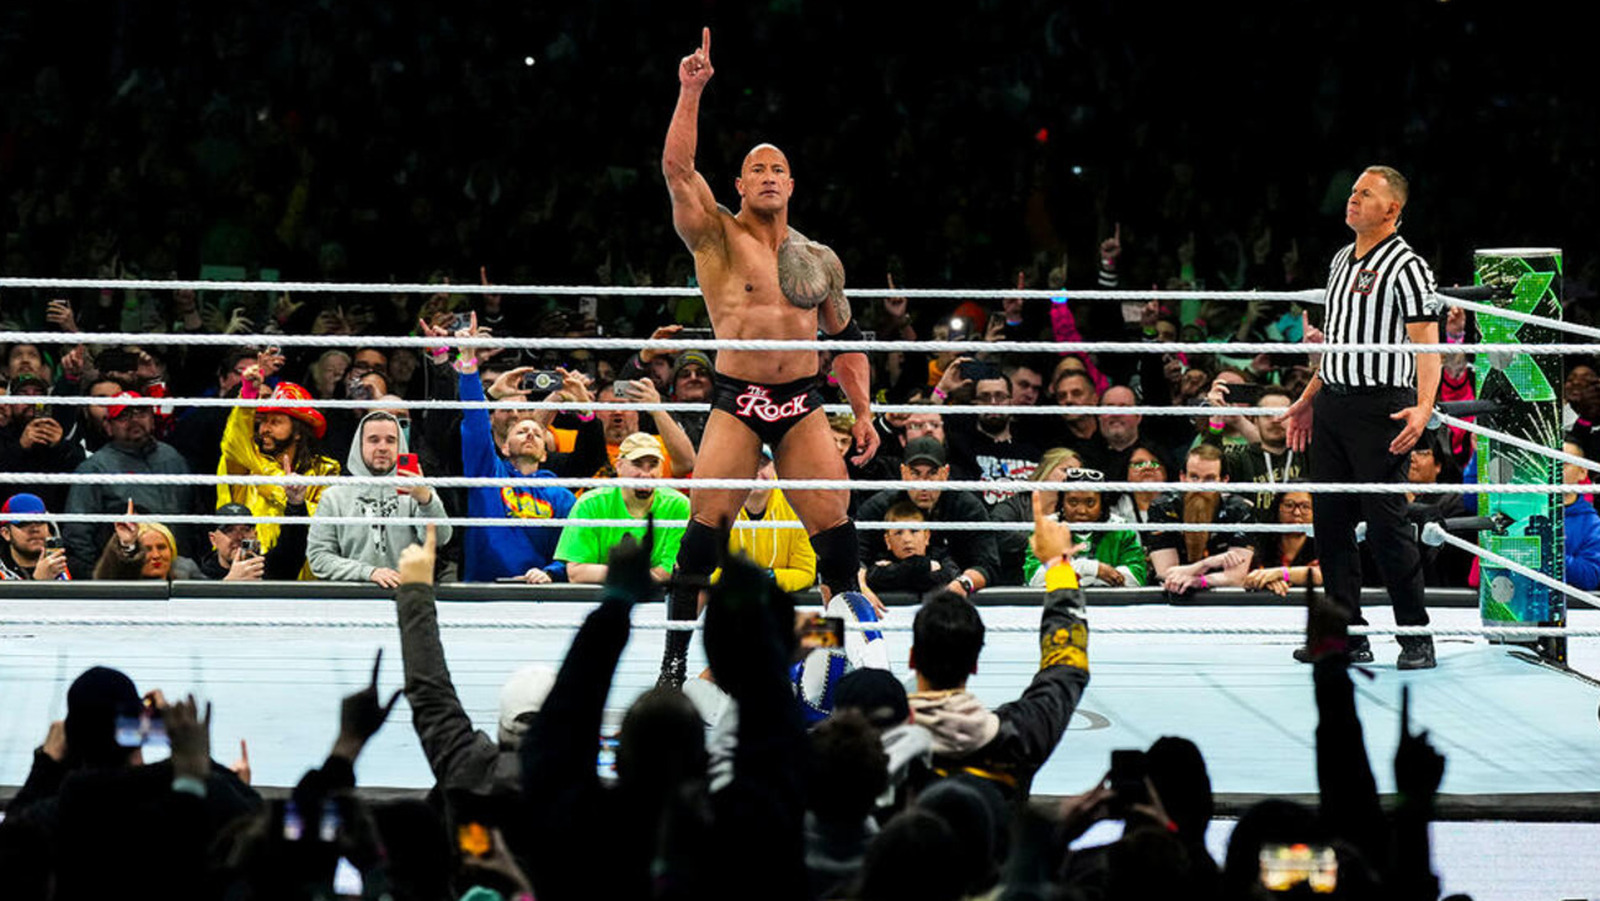 WWE's Dwayne 'The Rock' Johnson Received Over $9 Million In TKO Stock